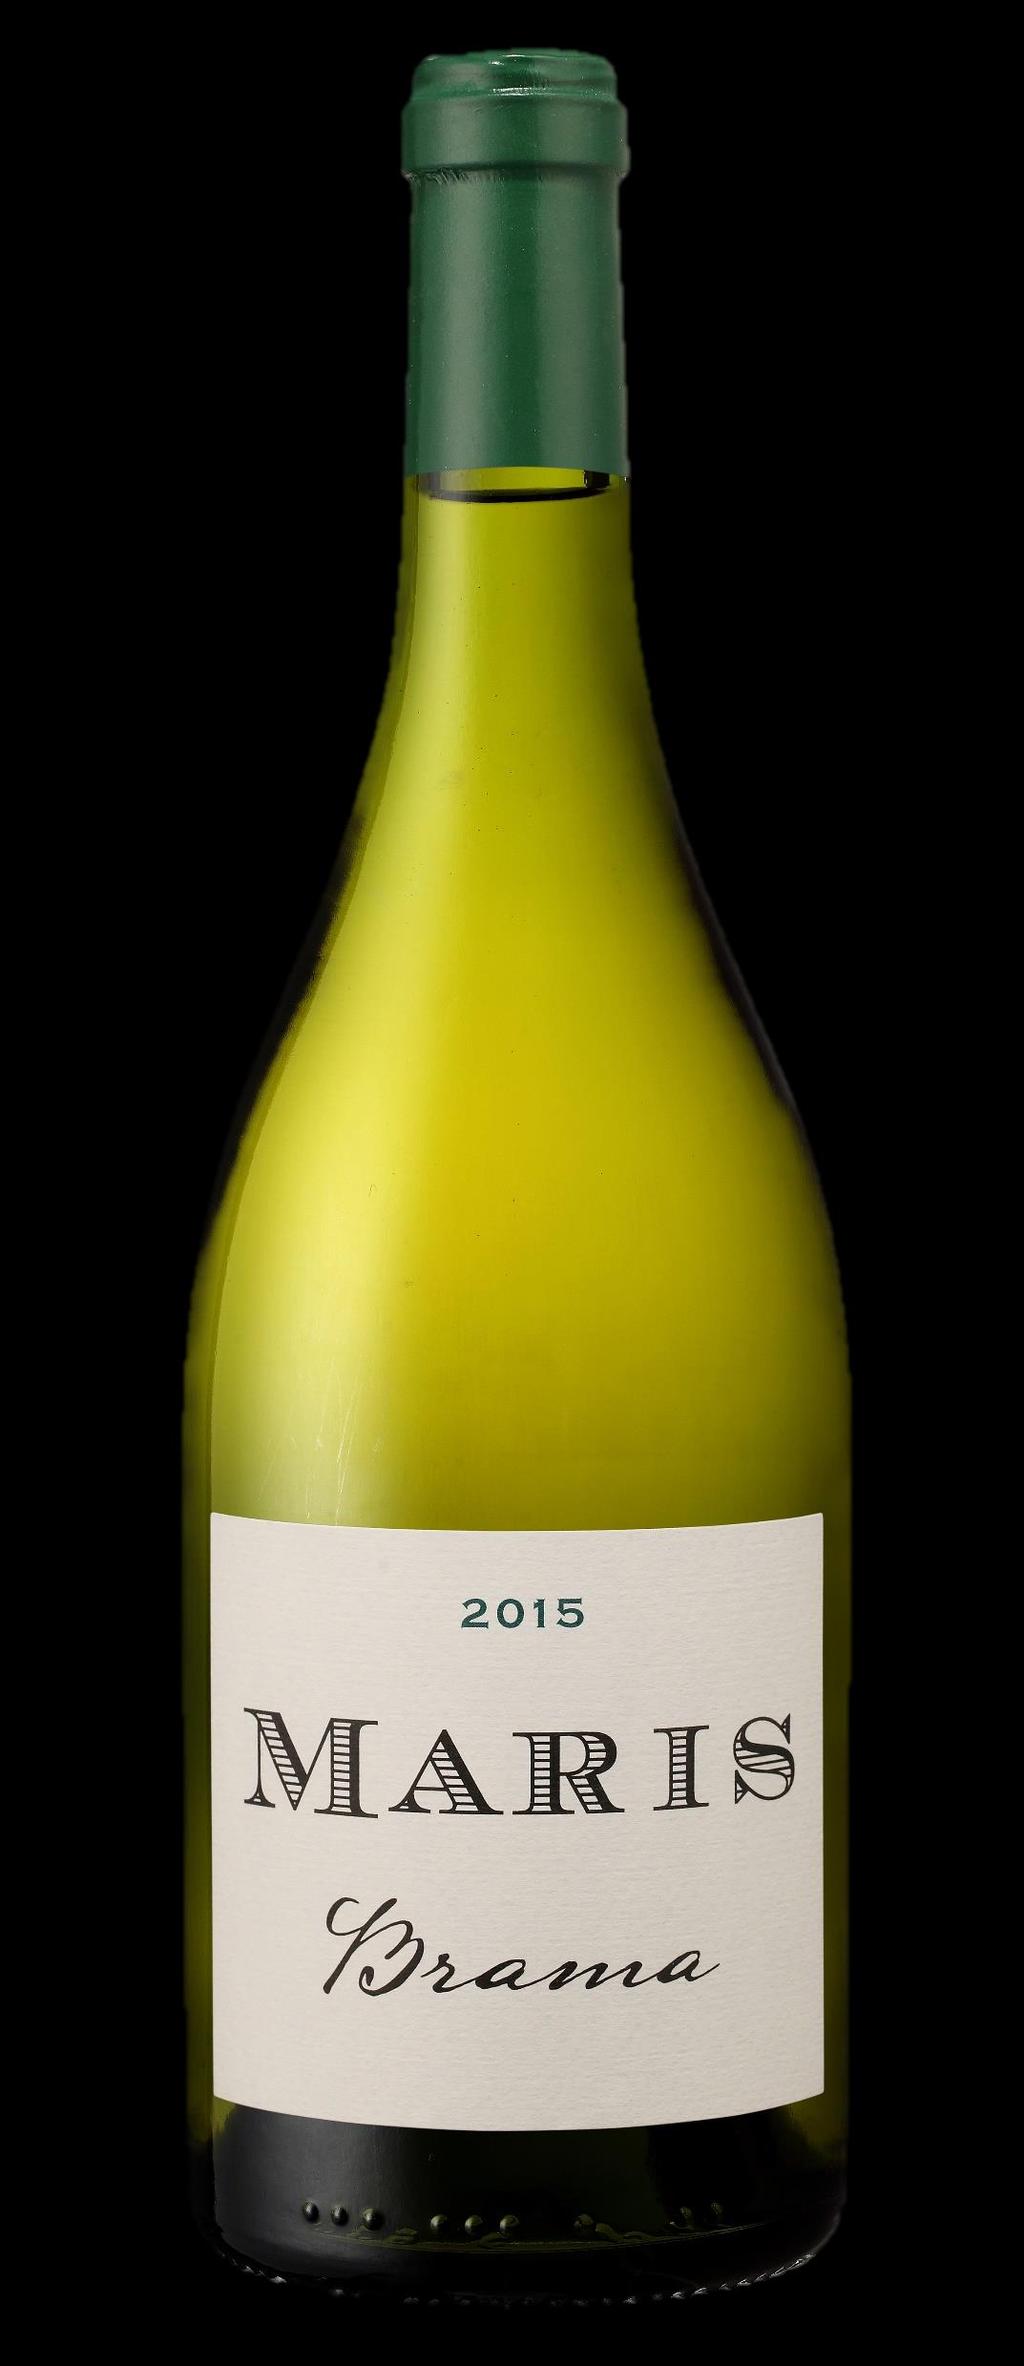 Brama 2015 is a medium bodied white wine made from Grenache Gris. This wine is from a parcel of 1Ha with mixed soil of limestone and clay above Felines-Minervois.